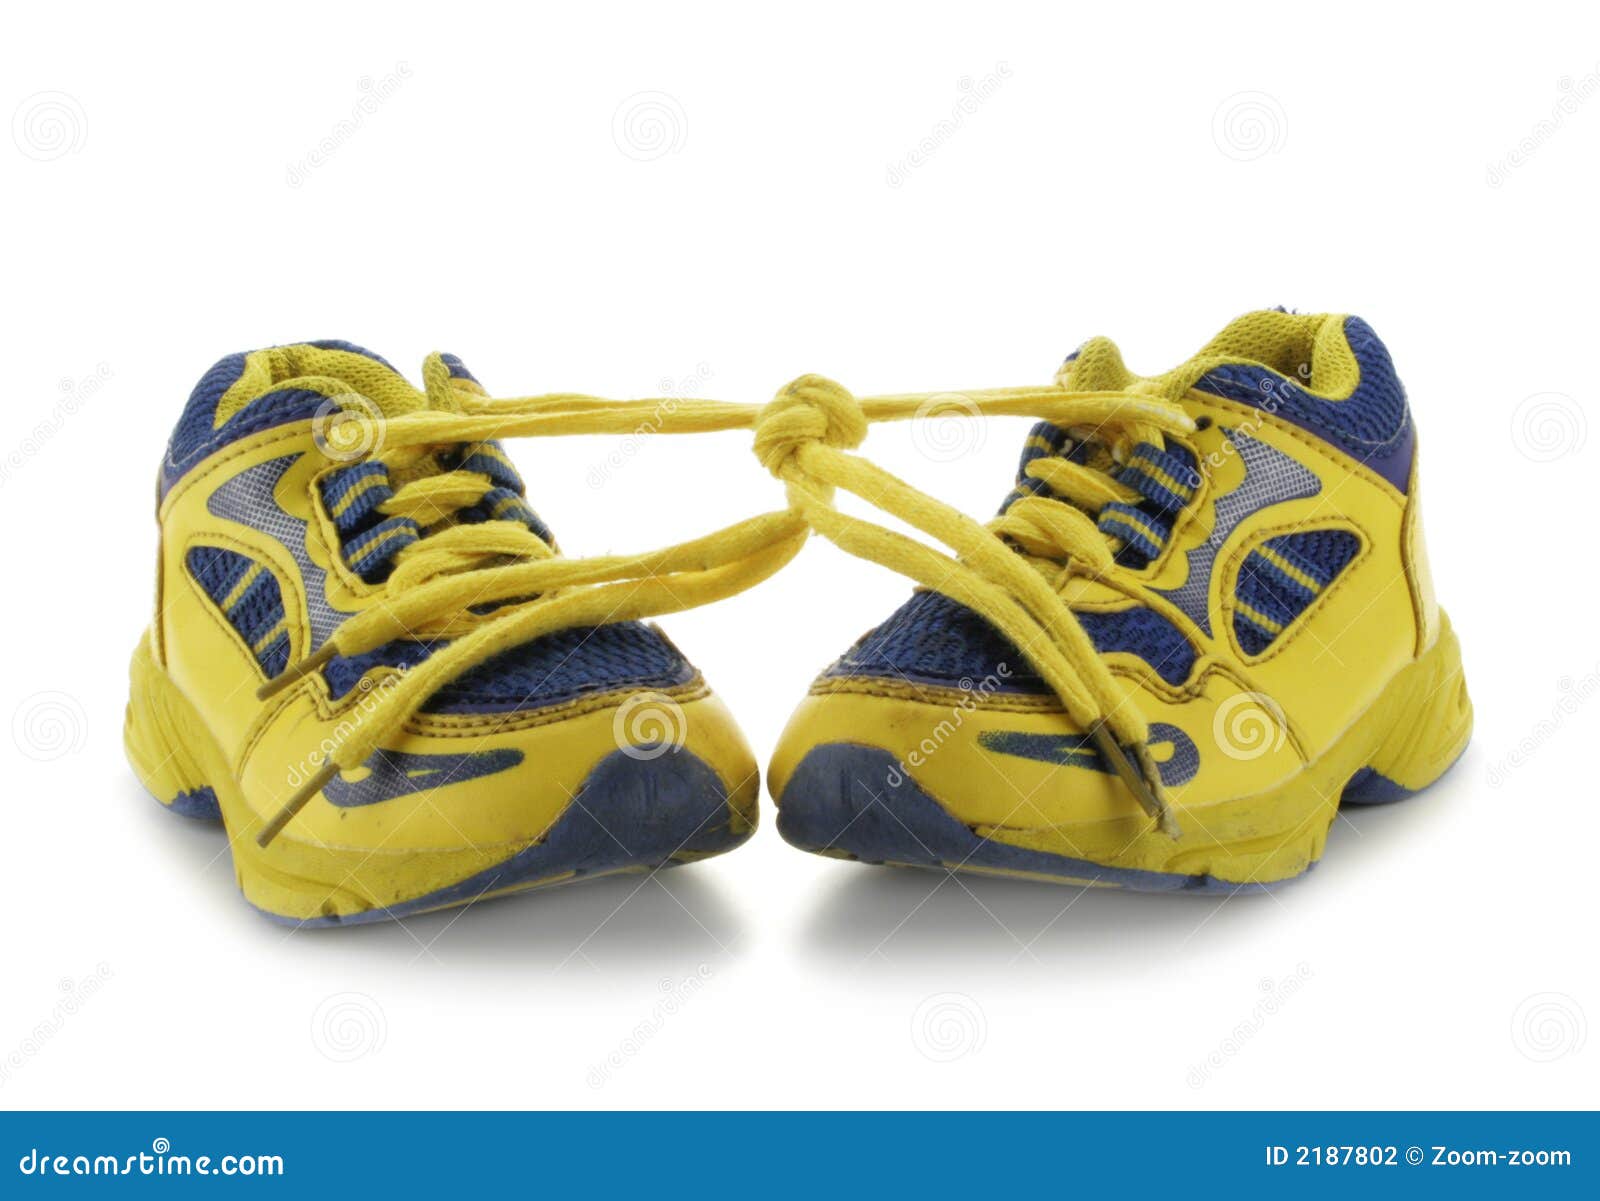 Child s running shoes stock photo. Image of small, shoestring - 2187802